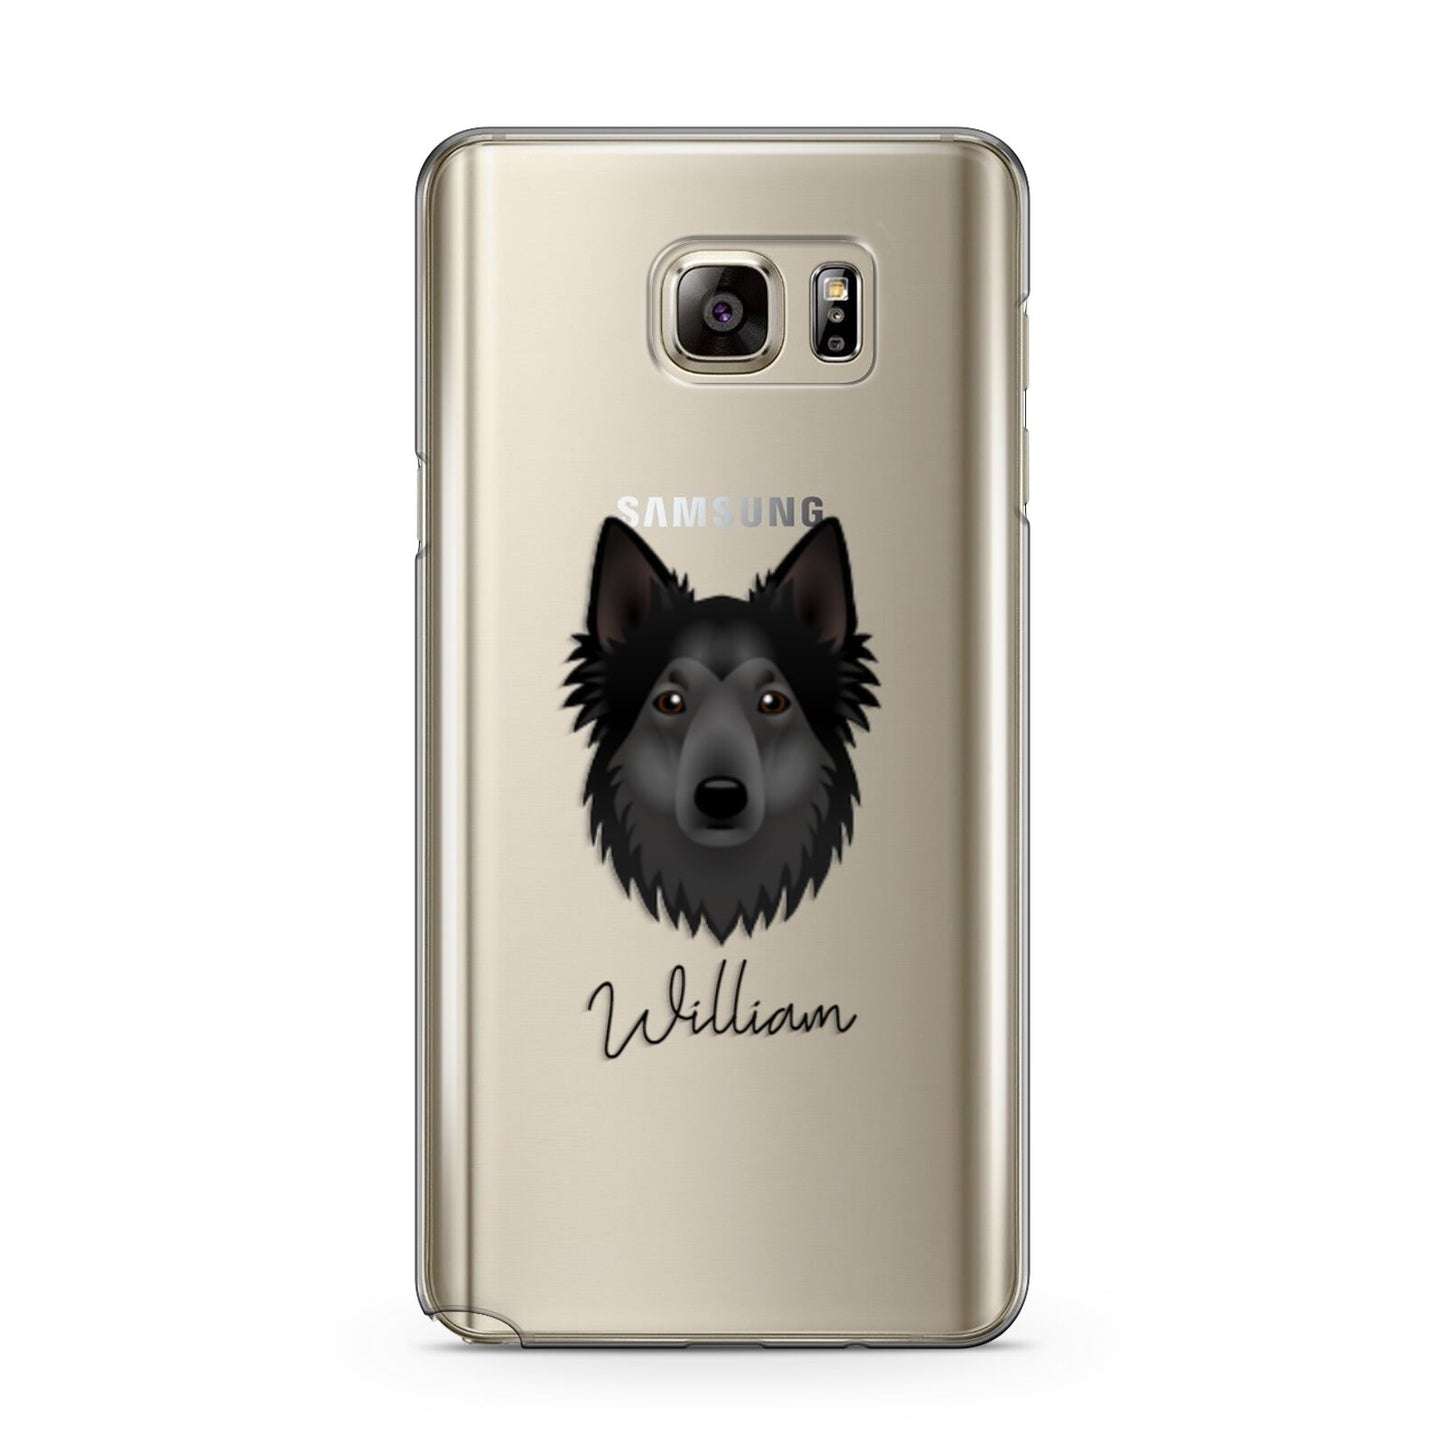 Shollie Personalised Samsung Galaxy Note 5 Case